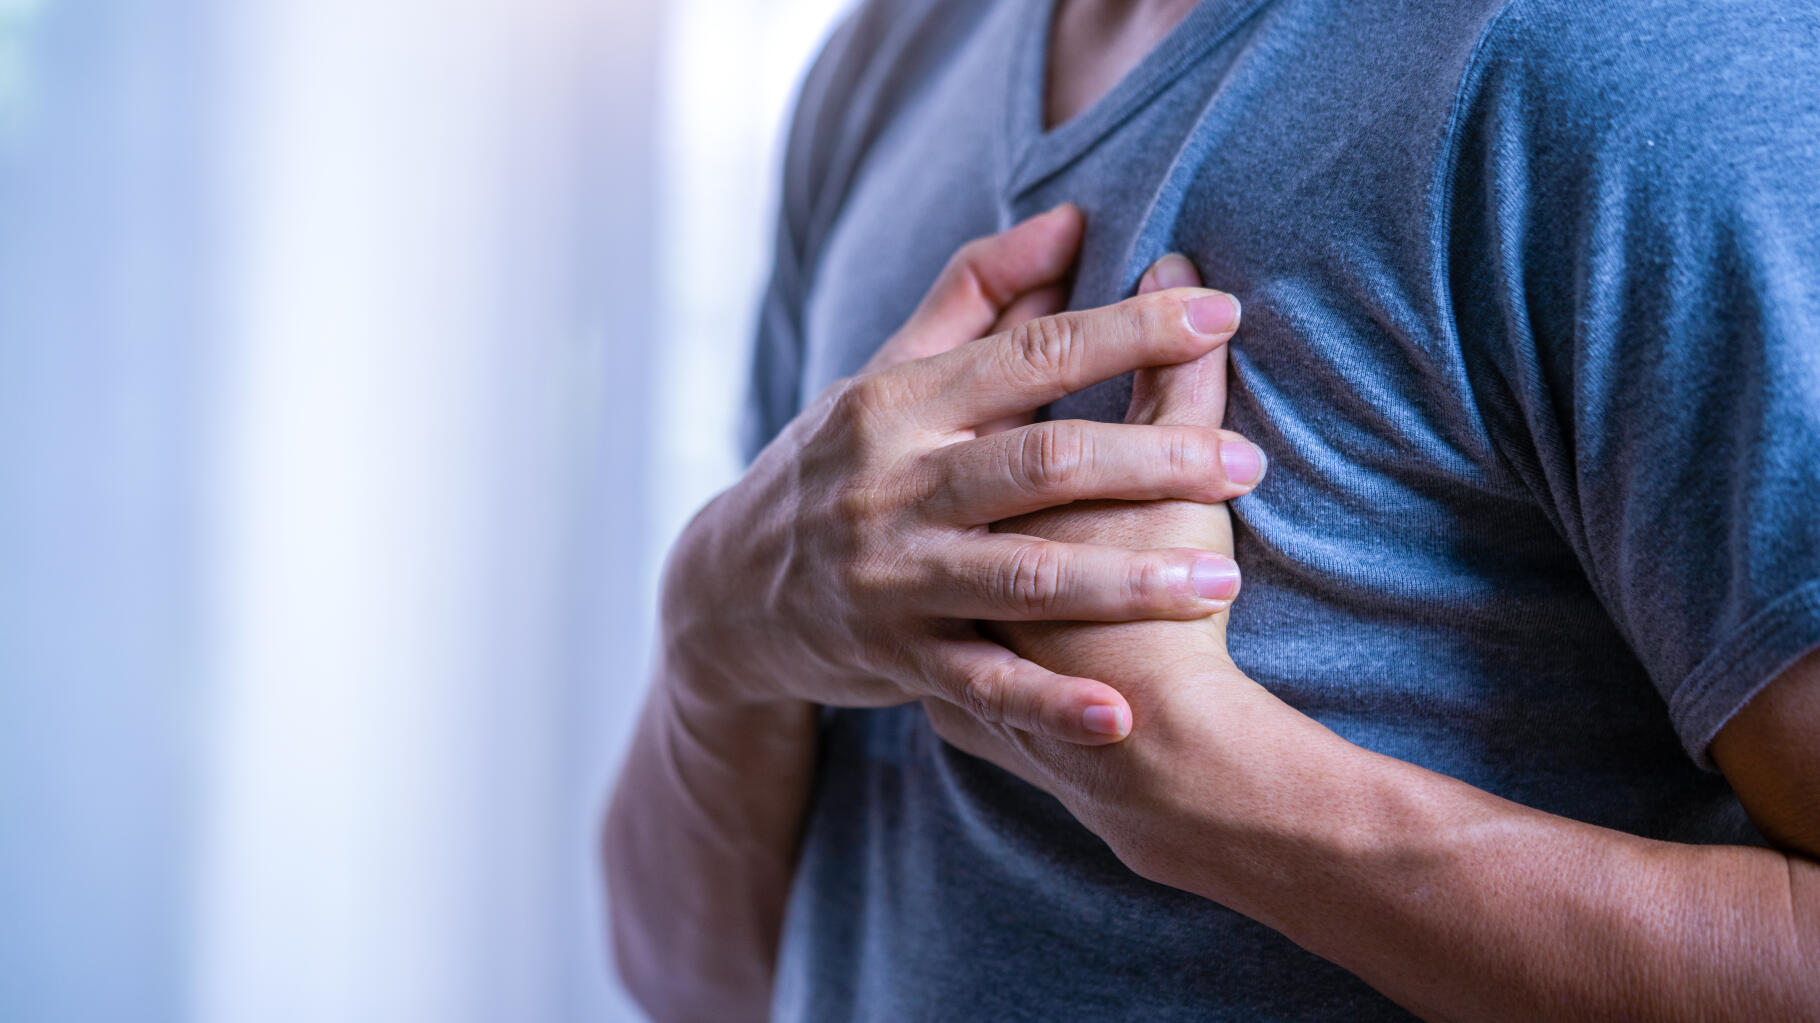 Heart attacks happen more often on Mondays, and science says so